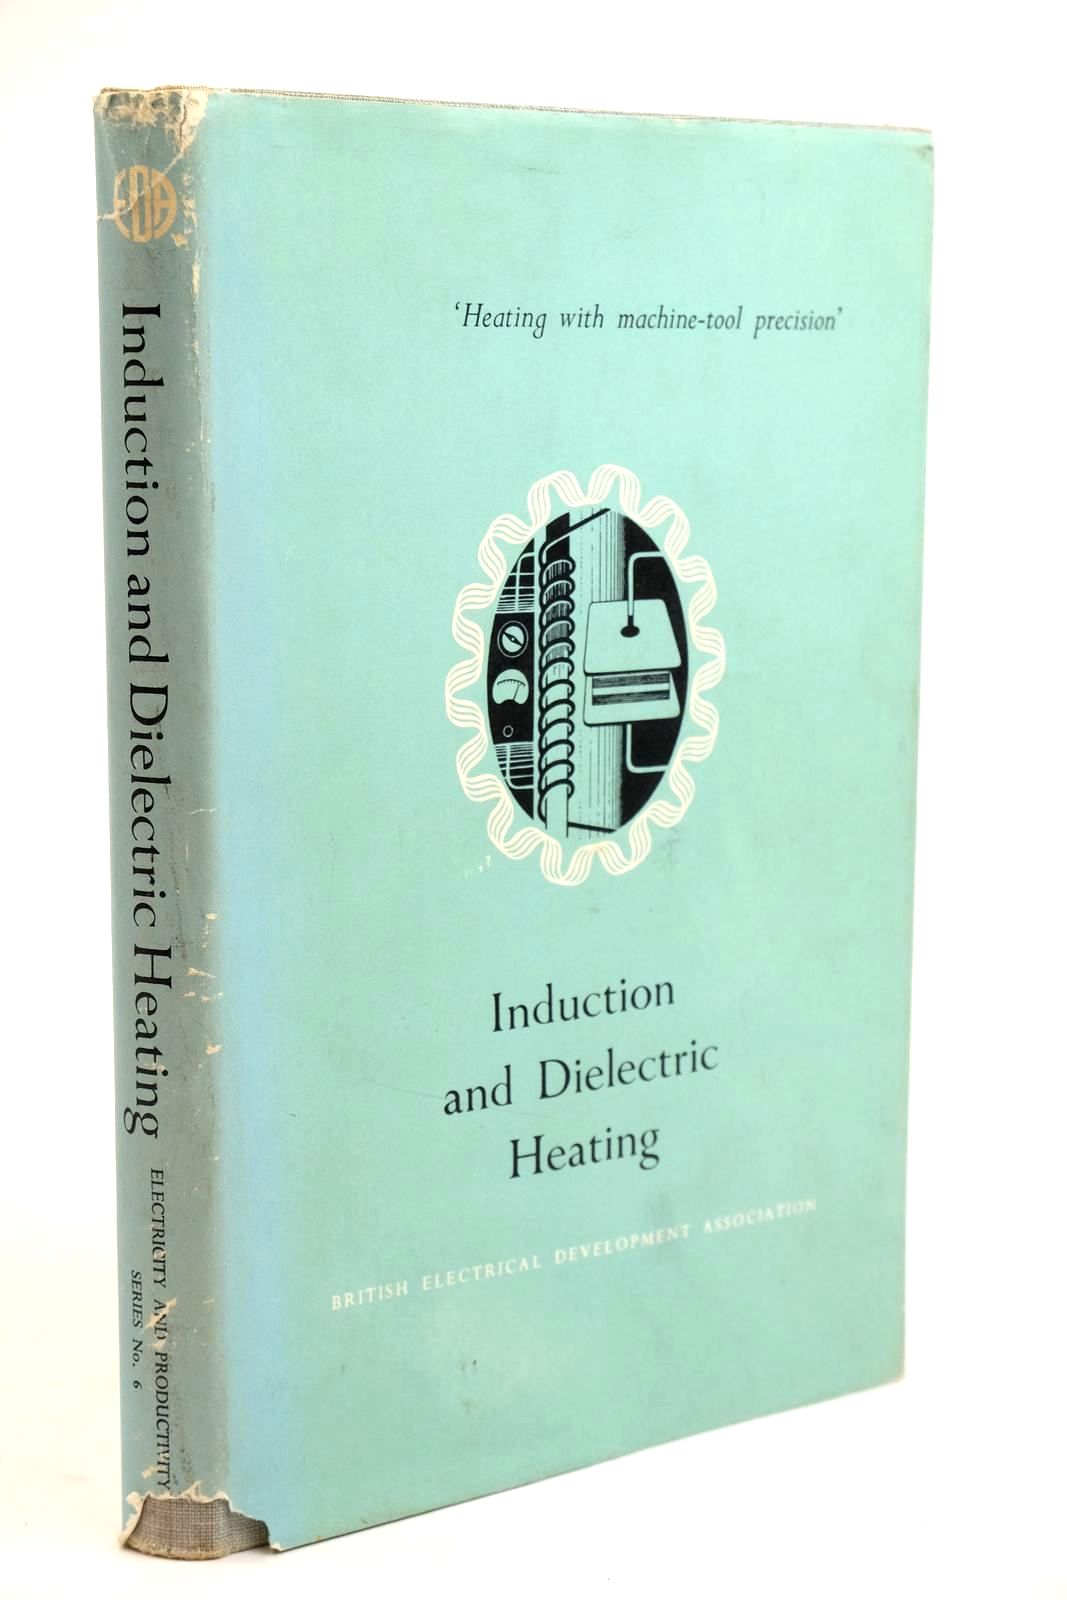 Photo of INDUCTION AND DIELECTRIC HEATING published by British Electrical Development Association (STOCK CODE: 1321491)  for sale by Stella & Rose's Books